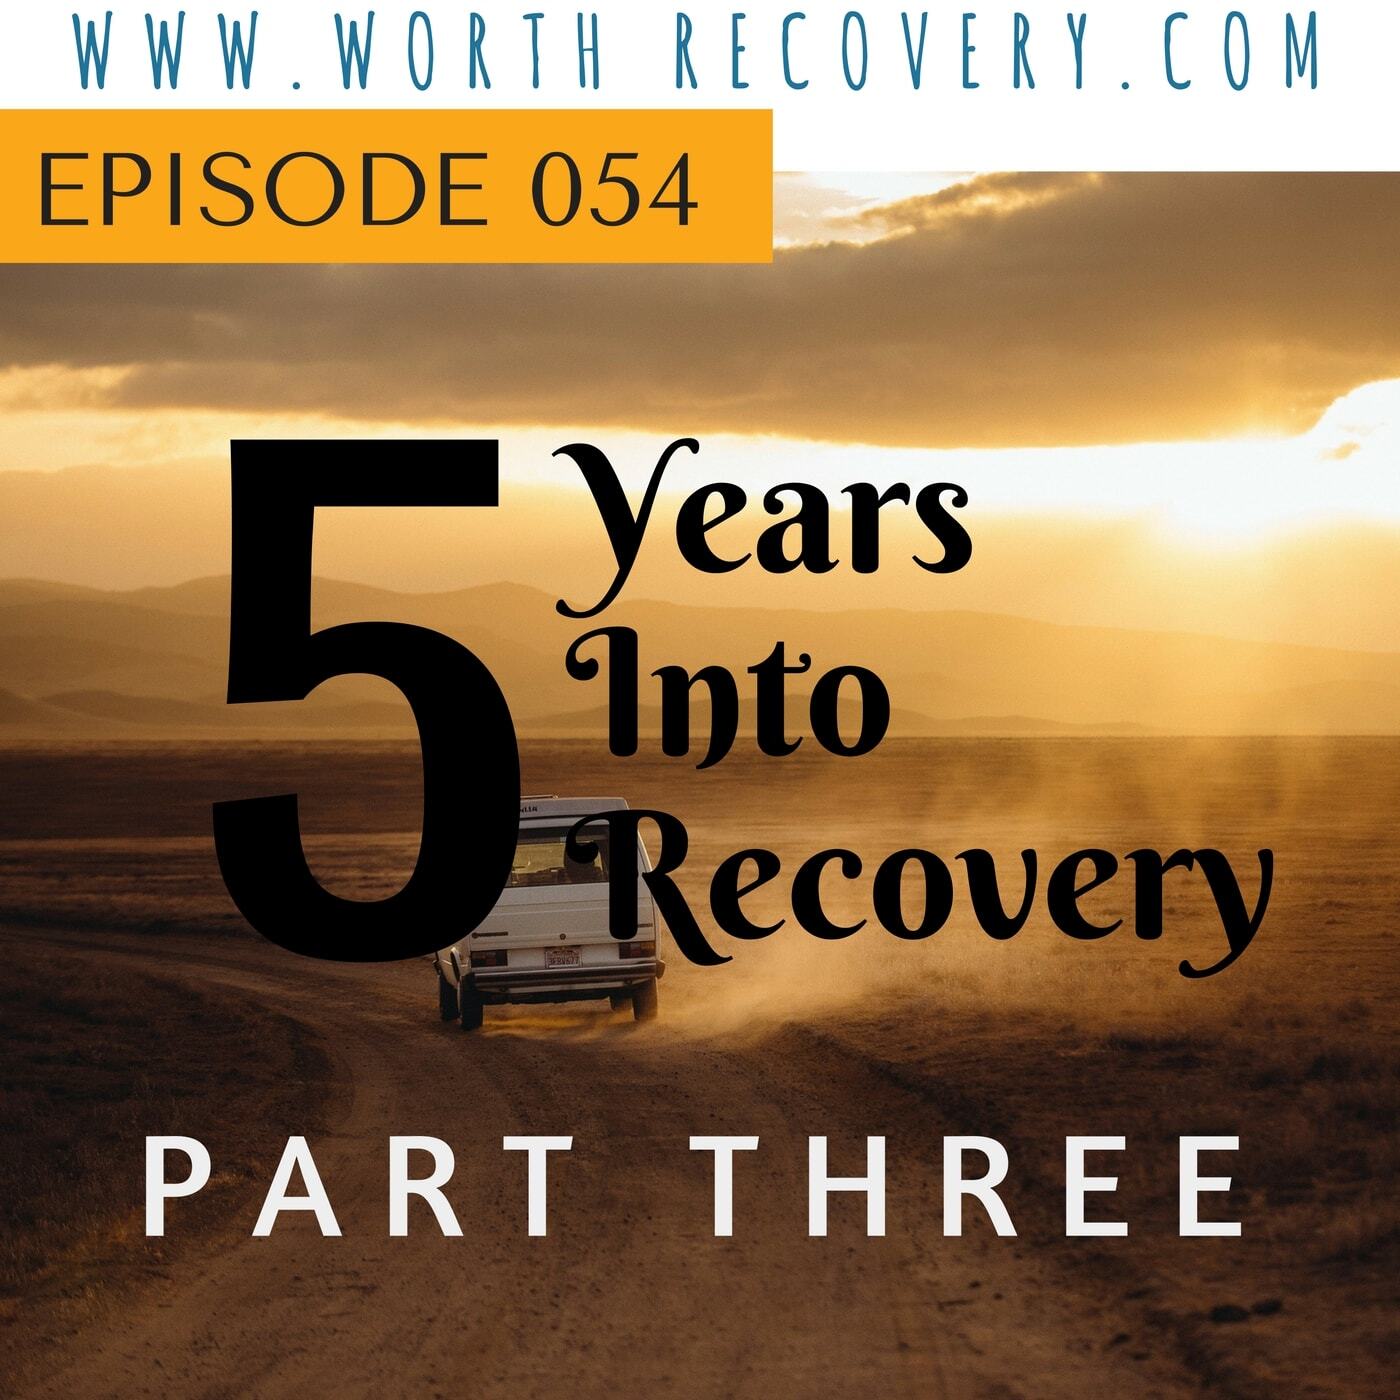 Episode 054: 5 Years Into Recovery, Part 3